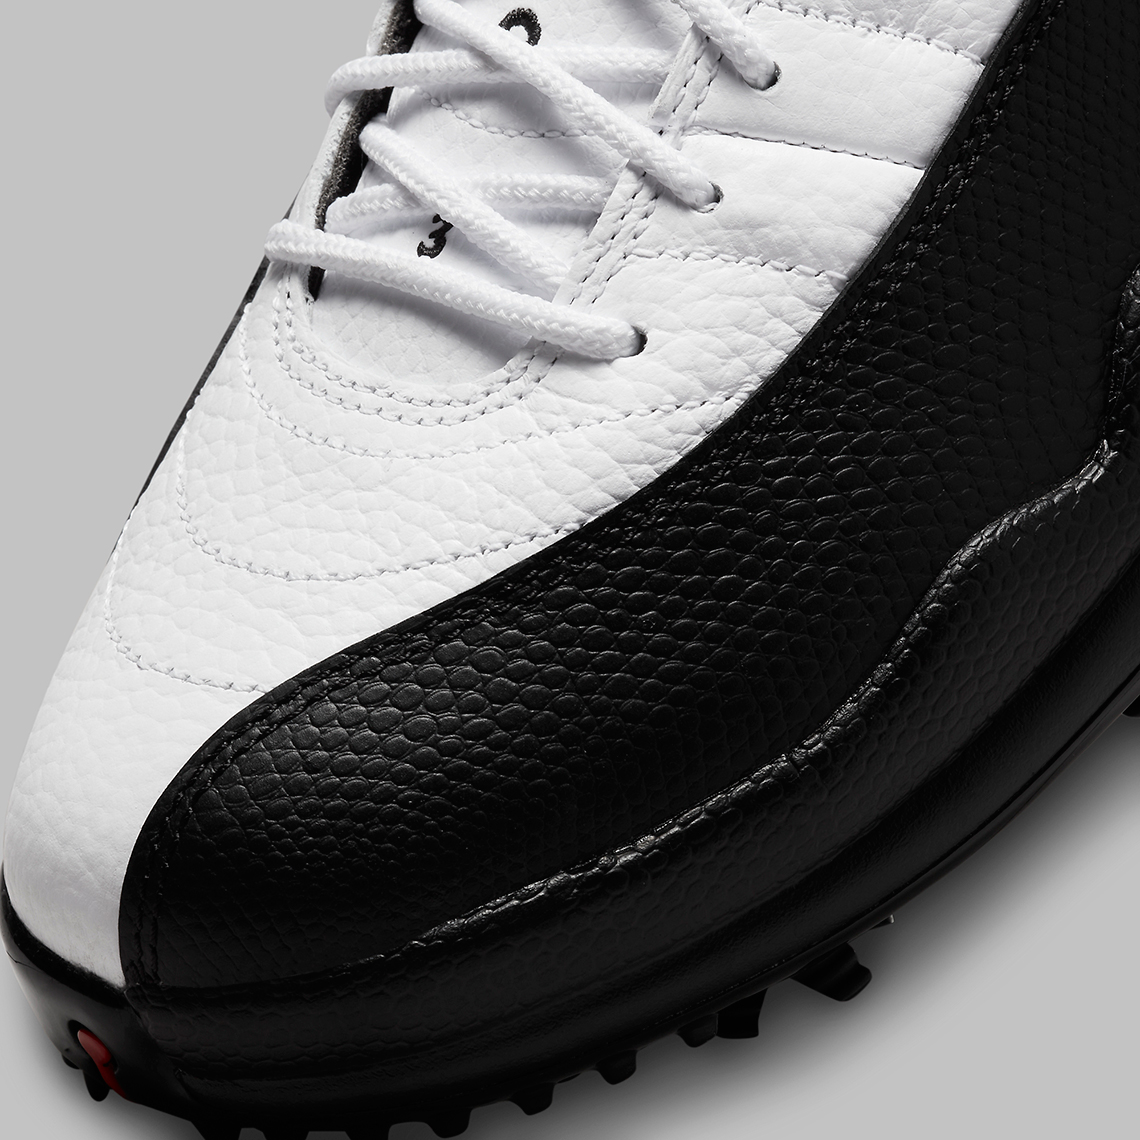 Air and Jordan Retro XIII 'Playoff' New Images Golf Taxi Official Images 6